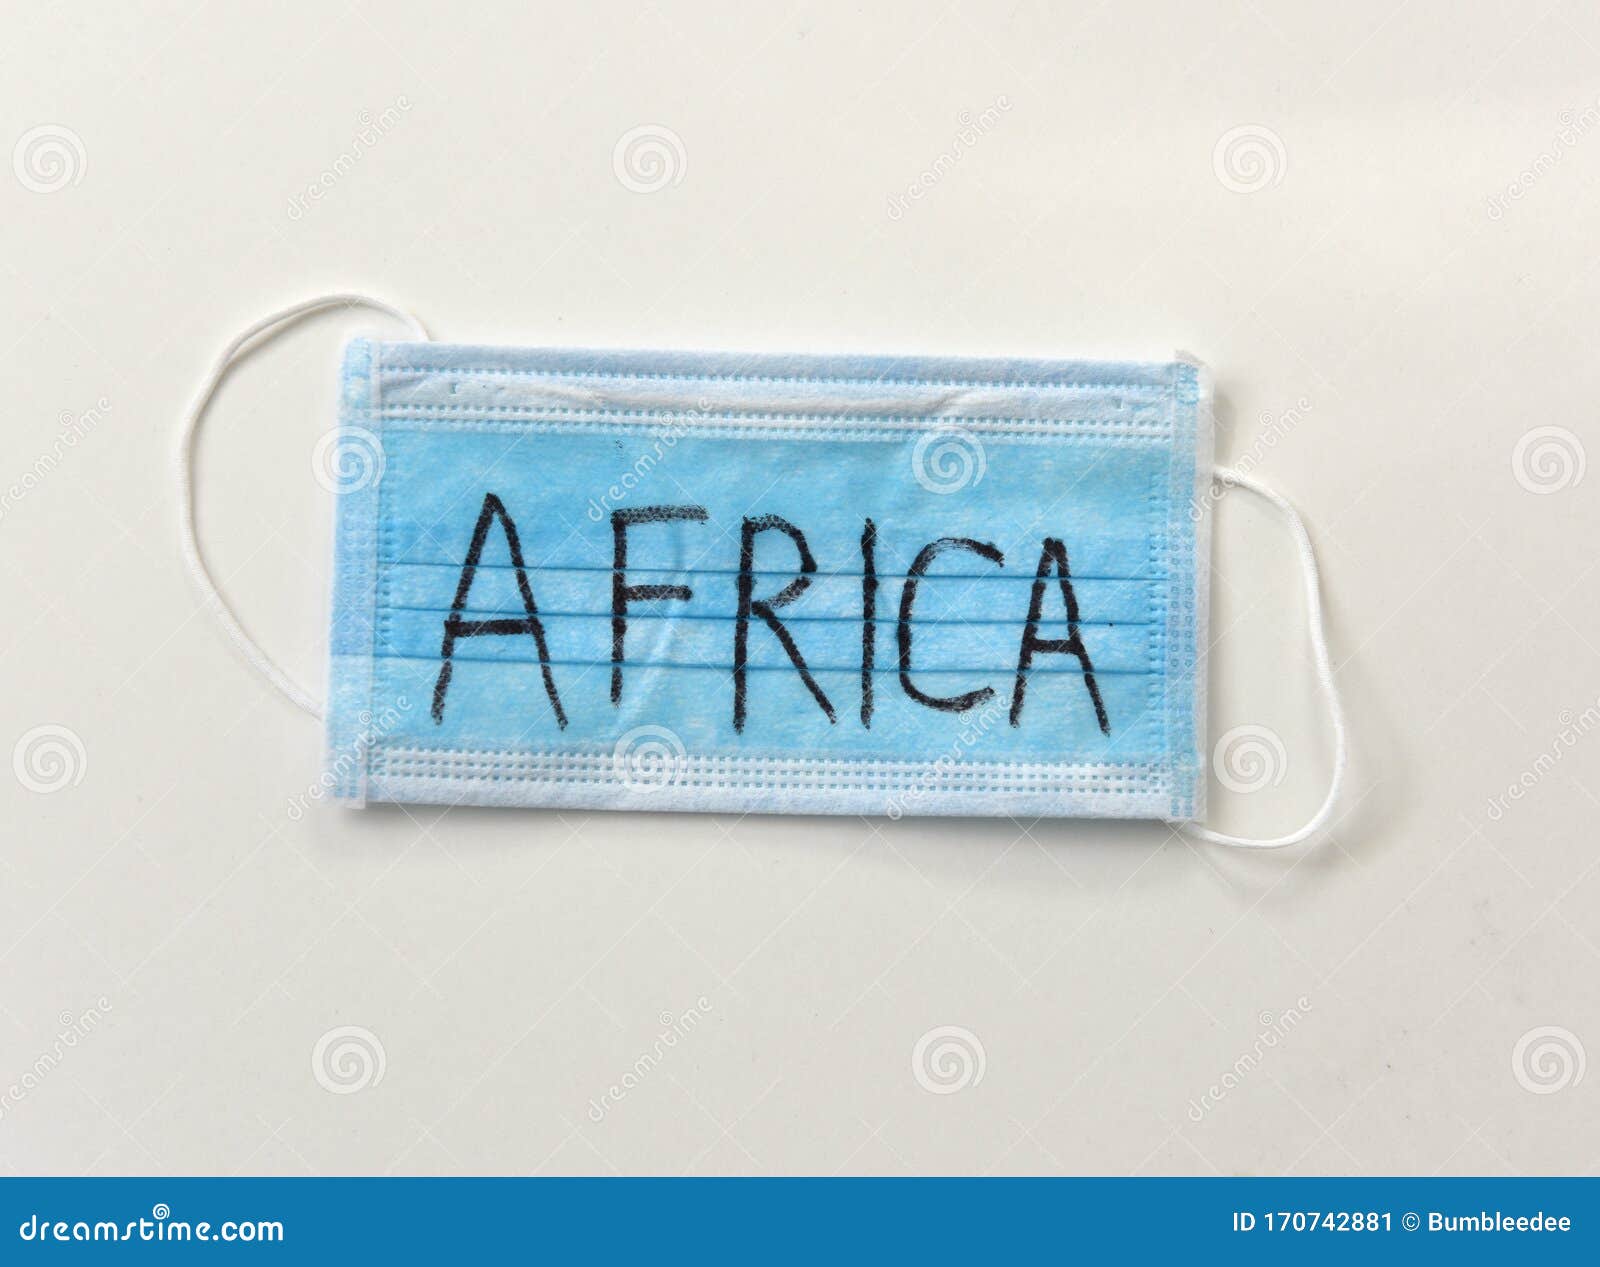 protective medical mask with inscription africa. epidemia in africa. wuhan coronavirus, 2019-ncov